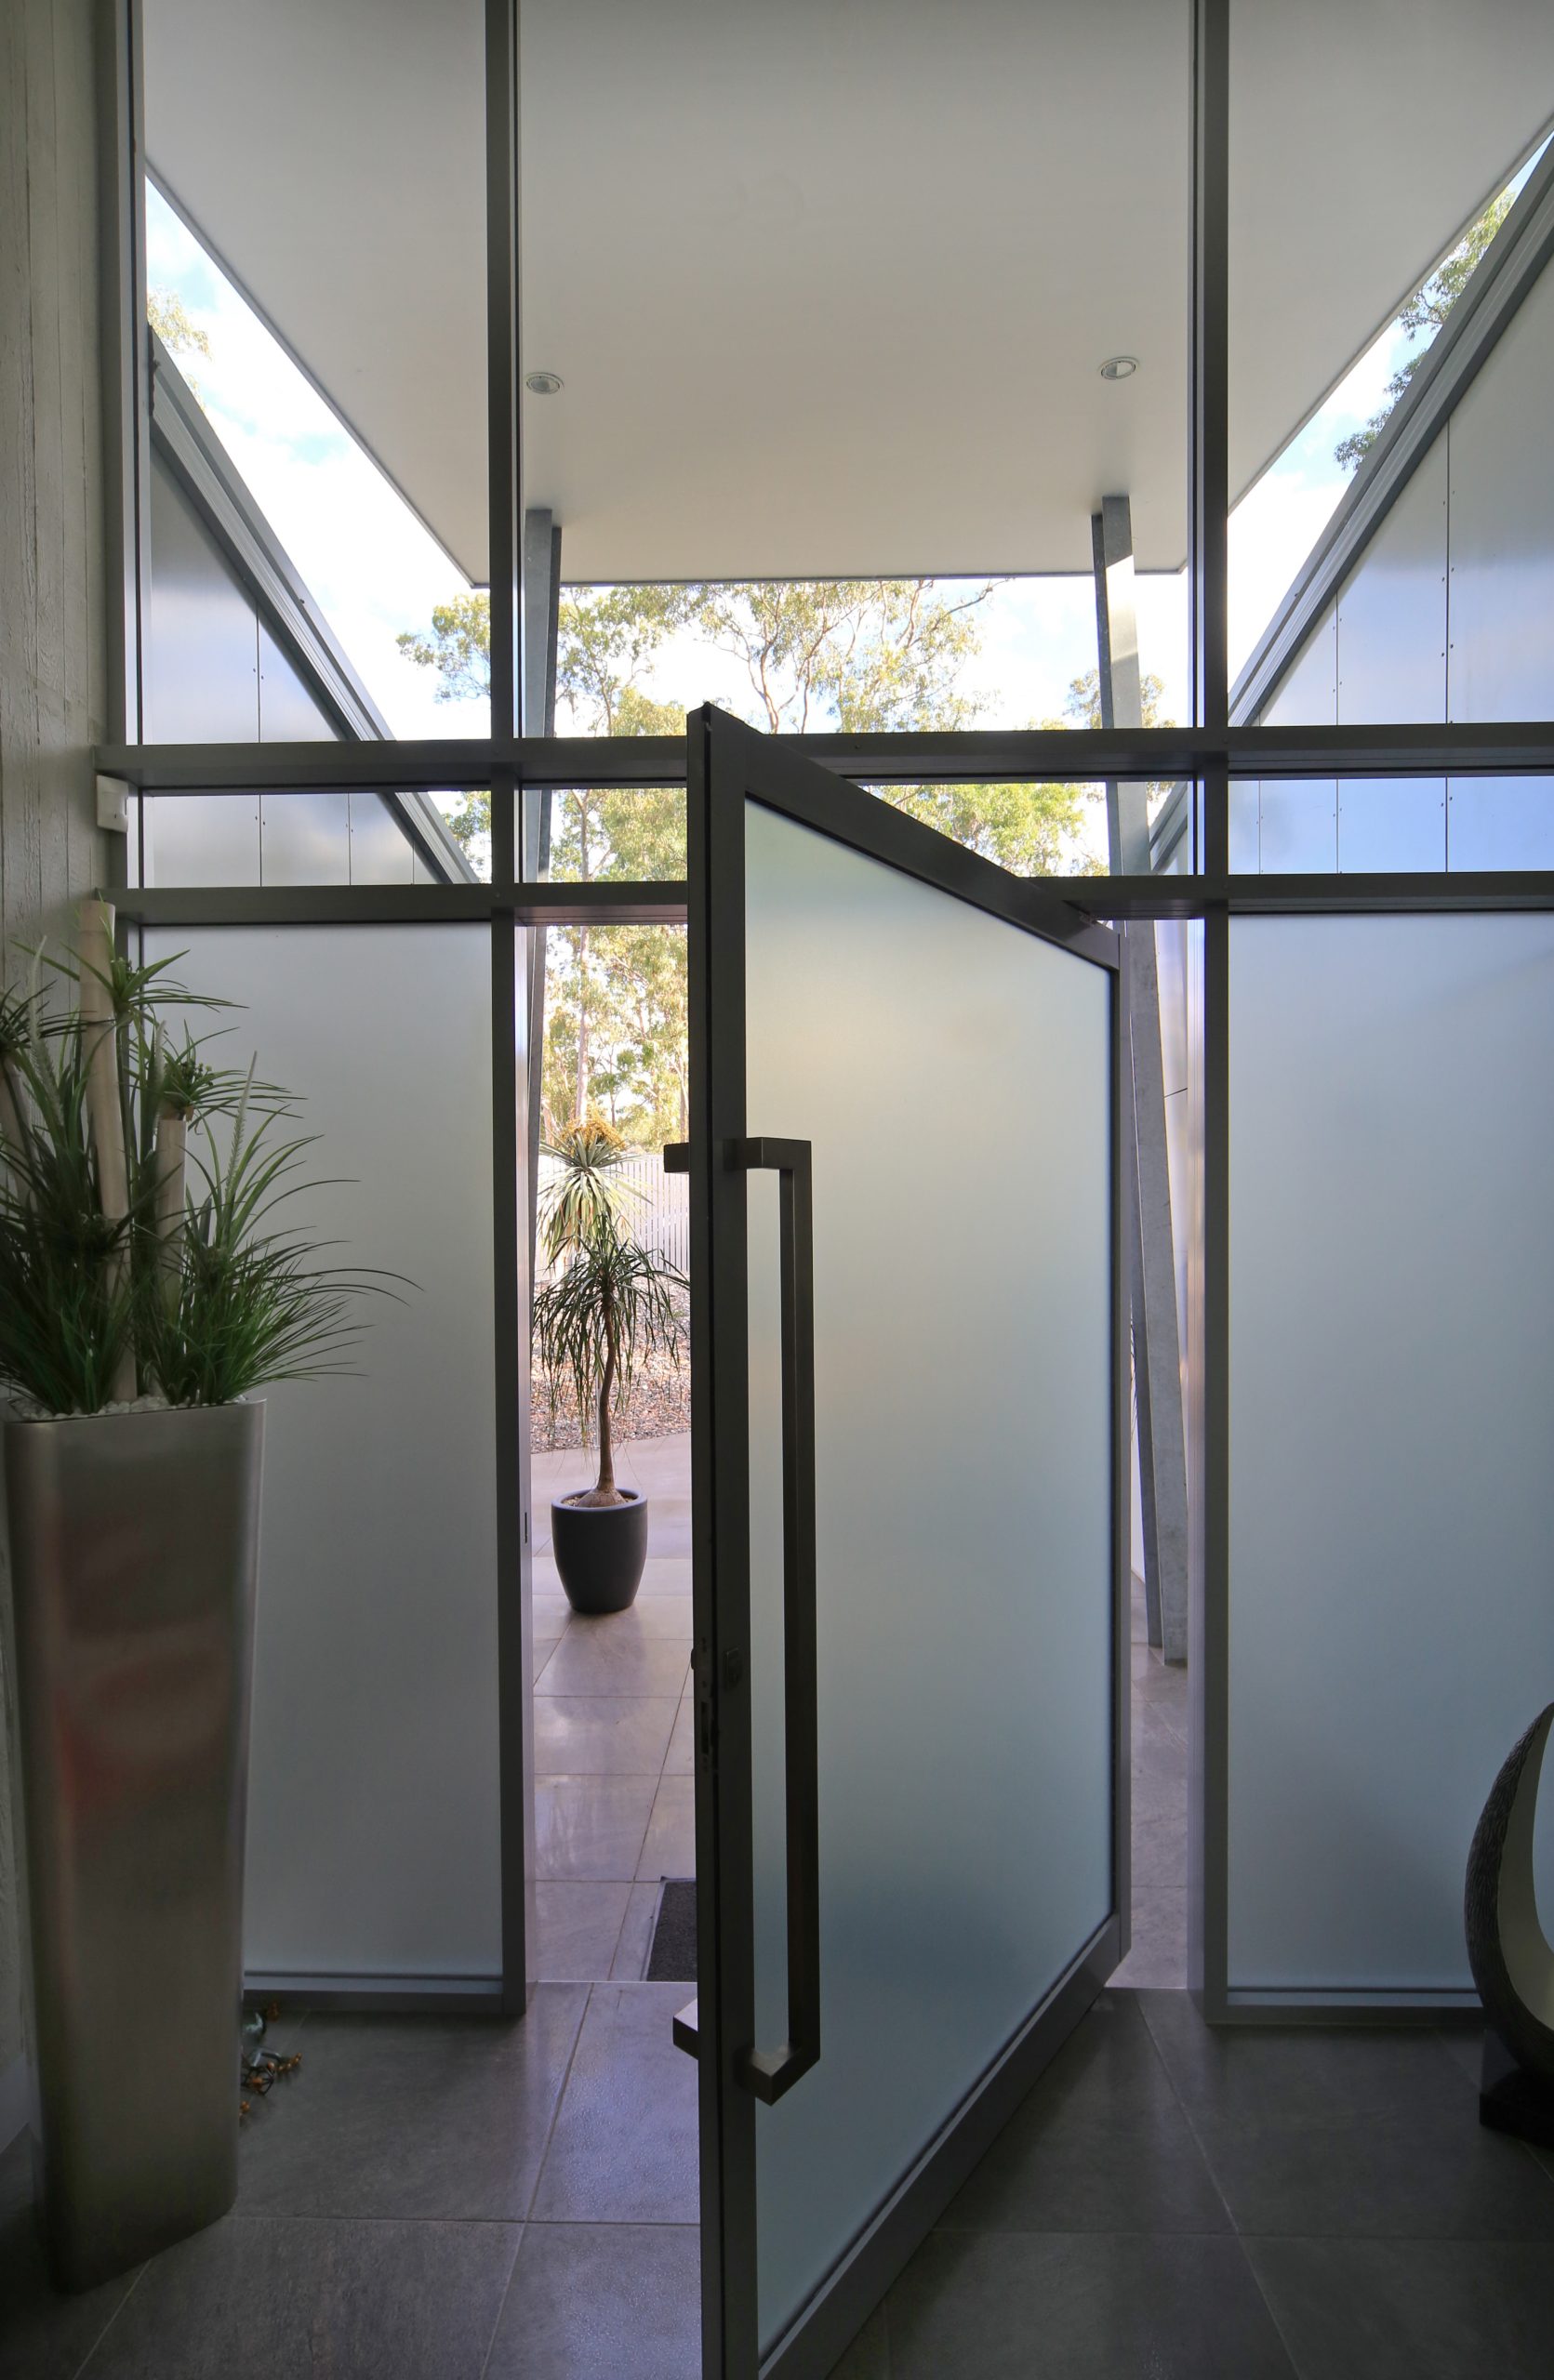 Viridian Glass – Consumers demand privacy and natural light